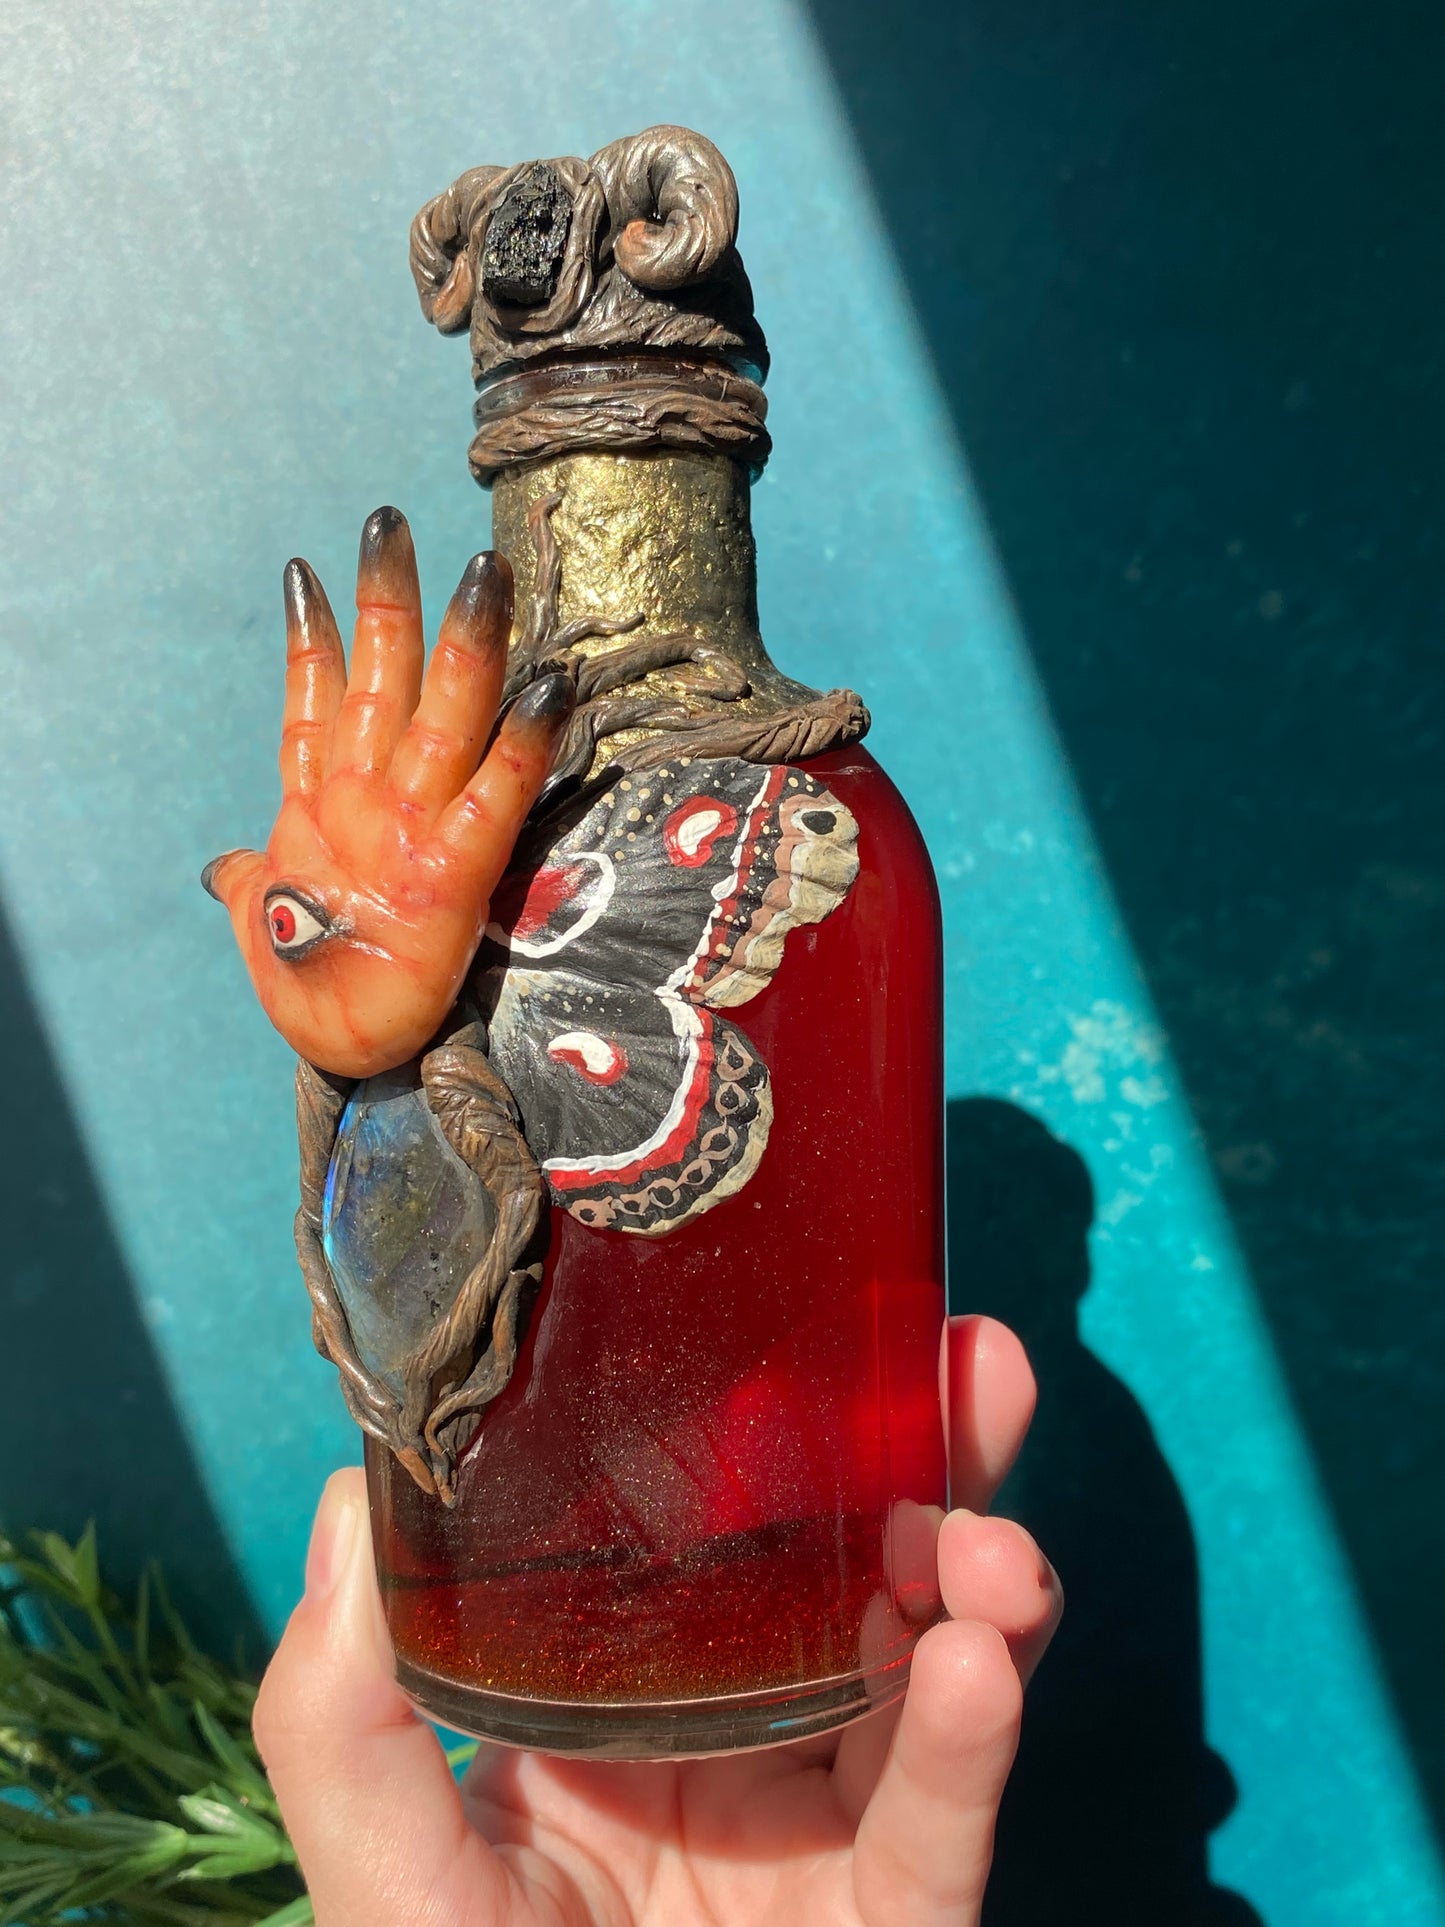 Pans Labyrinth inspired hand sculpted Pale Man potion bottle